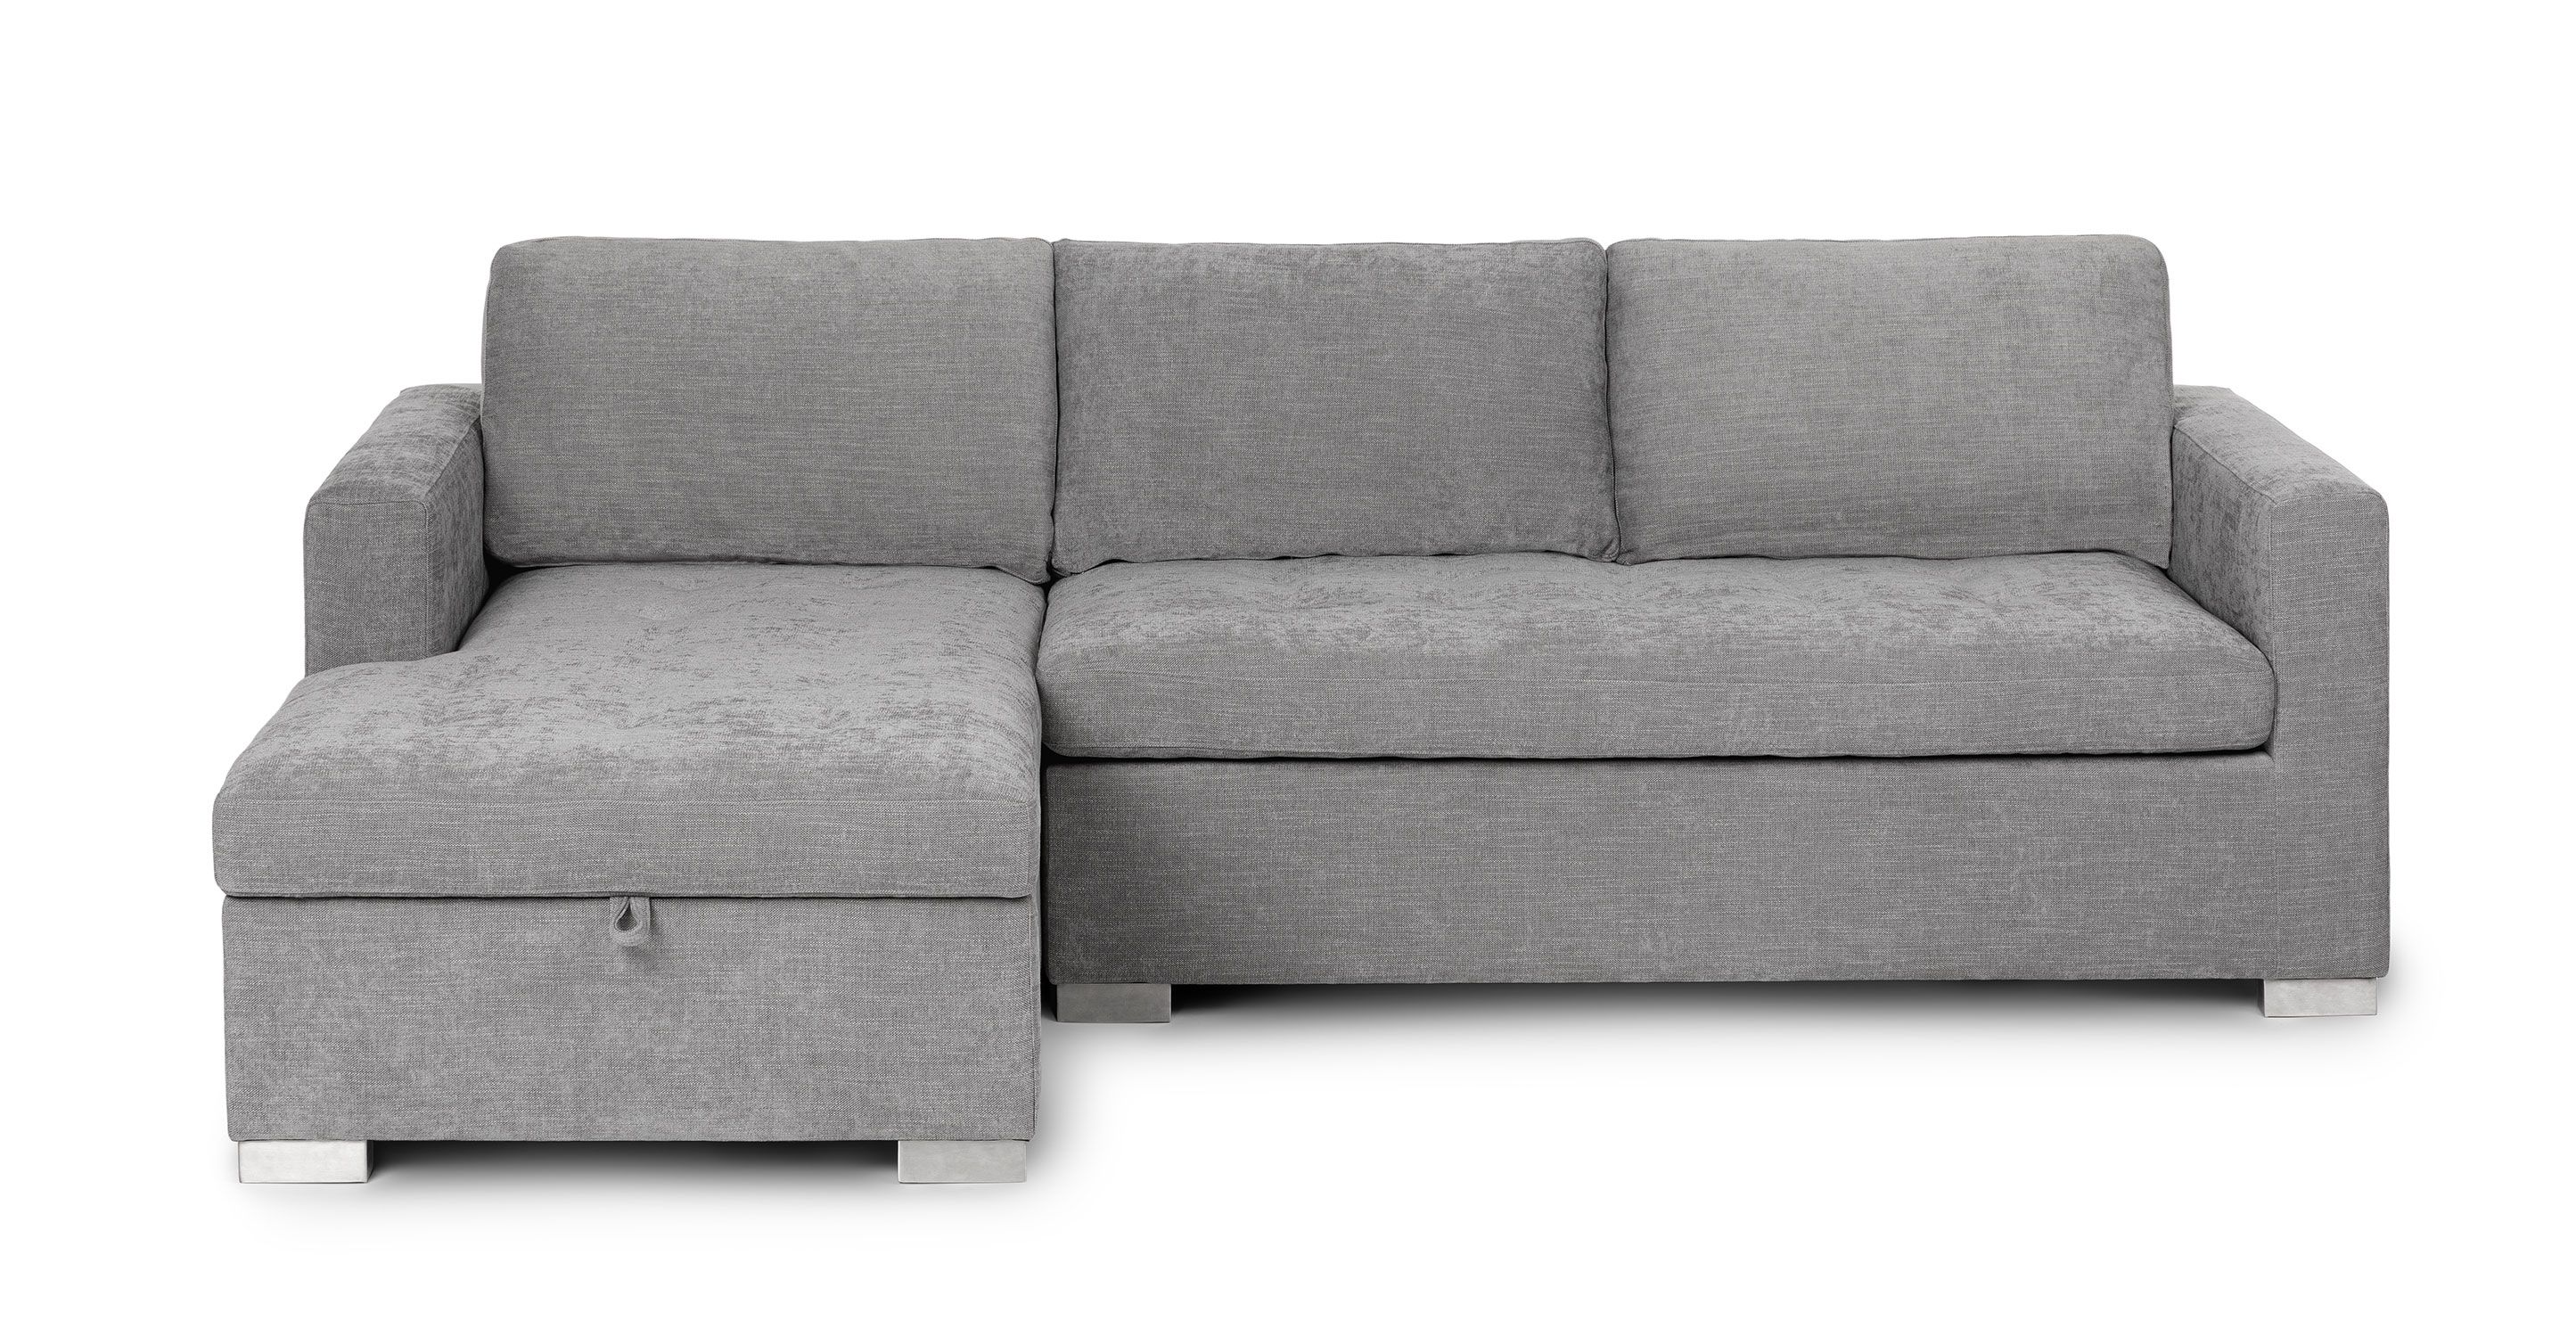 Left Facing Dawn Gray Fabric Sectional Sofa Bed | Soma | Article With Left Or Right Facing Sleeper Sectional Sofas (View 6 of 20)